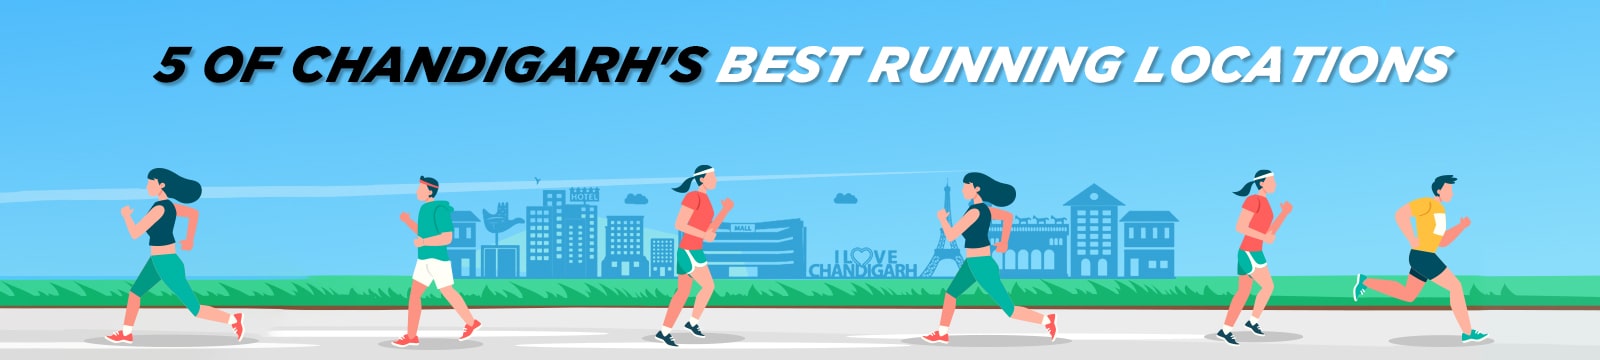 Hit the spot: 5 of Chandigarh’s Best Jogging or Running Locations